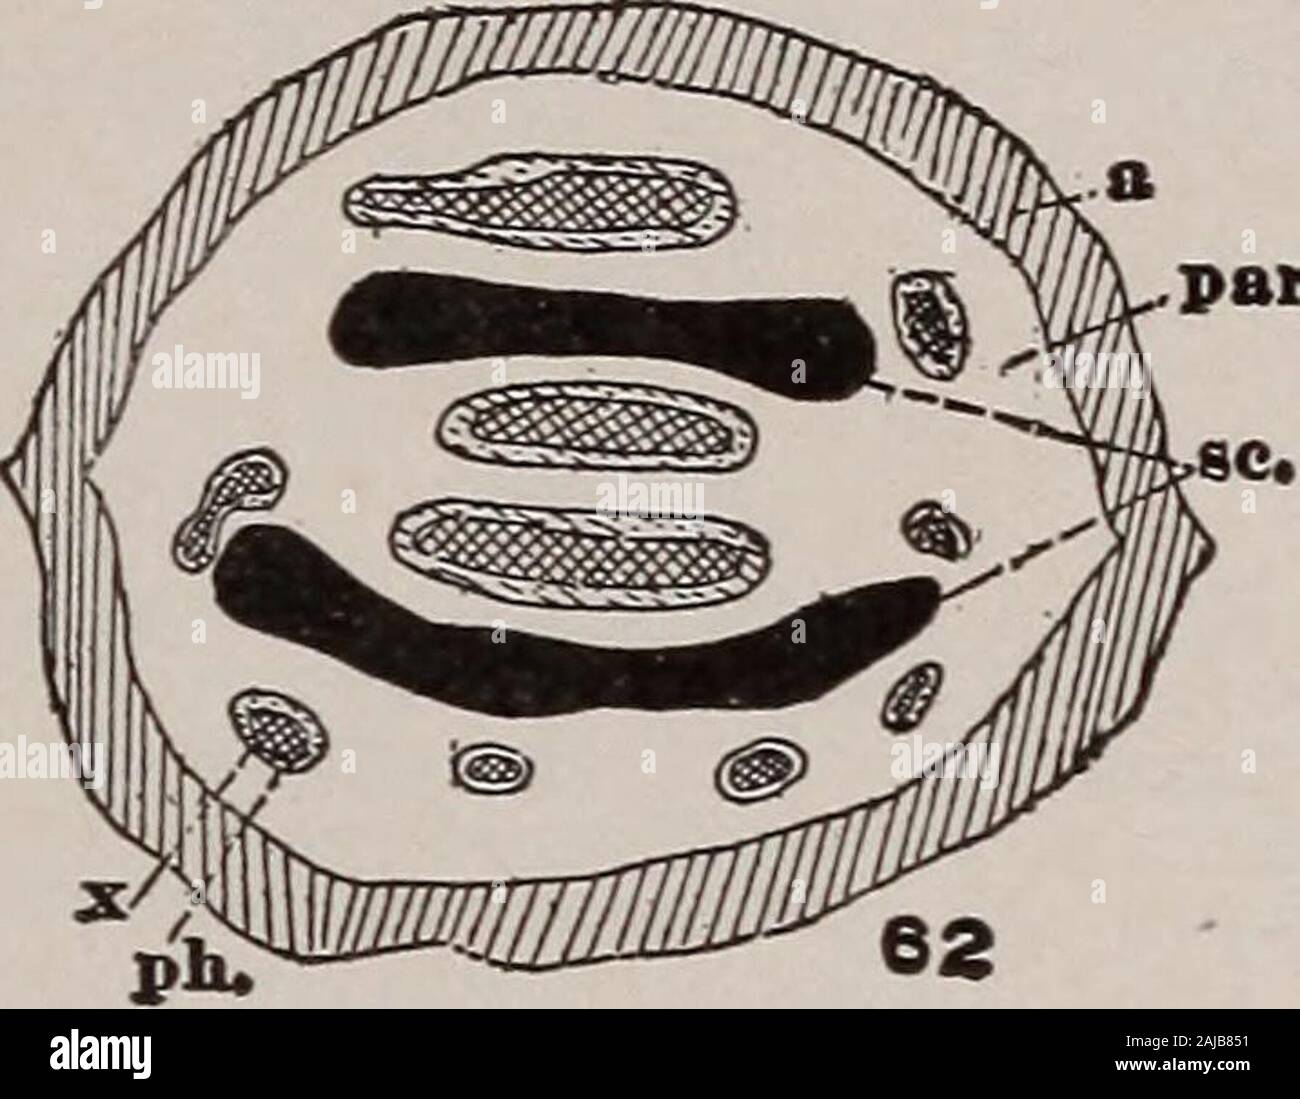 Elementary botany . hloem bythe phloem sheath, and this in turn bythe endodermis, giving a concentric ar-rangement of the component tissues. A cross-section of the stem (fig.419) shows two large areas of sclerenchyma, which gives the chief mechan-ical support, the bundles being comparatively weak. 712. Origin of root tissues.—A similar apical meristem exists in roots,but there is in addition a fourth region of formative tissue in front of themeristem called calyptrogen (fig. 420). This gives rise to the root capwhich serves to protect the meristem. The vascular cylinder in roots isvery differe Stock Photo